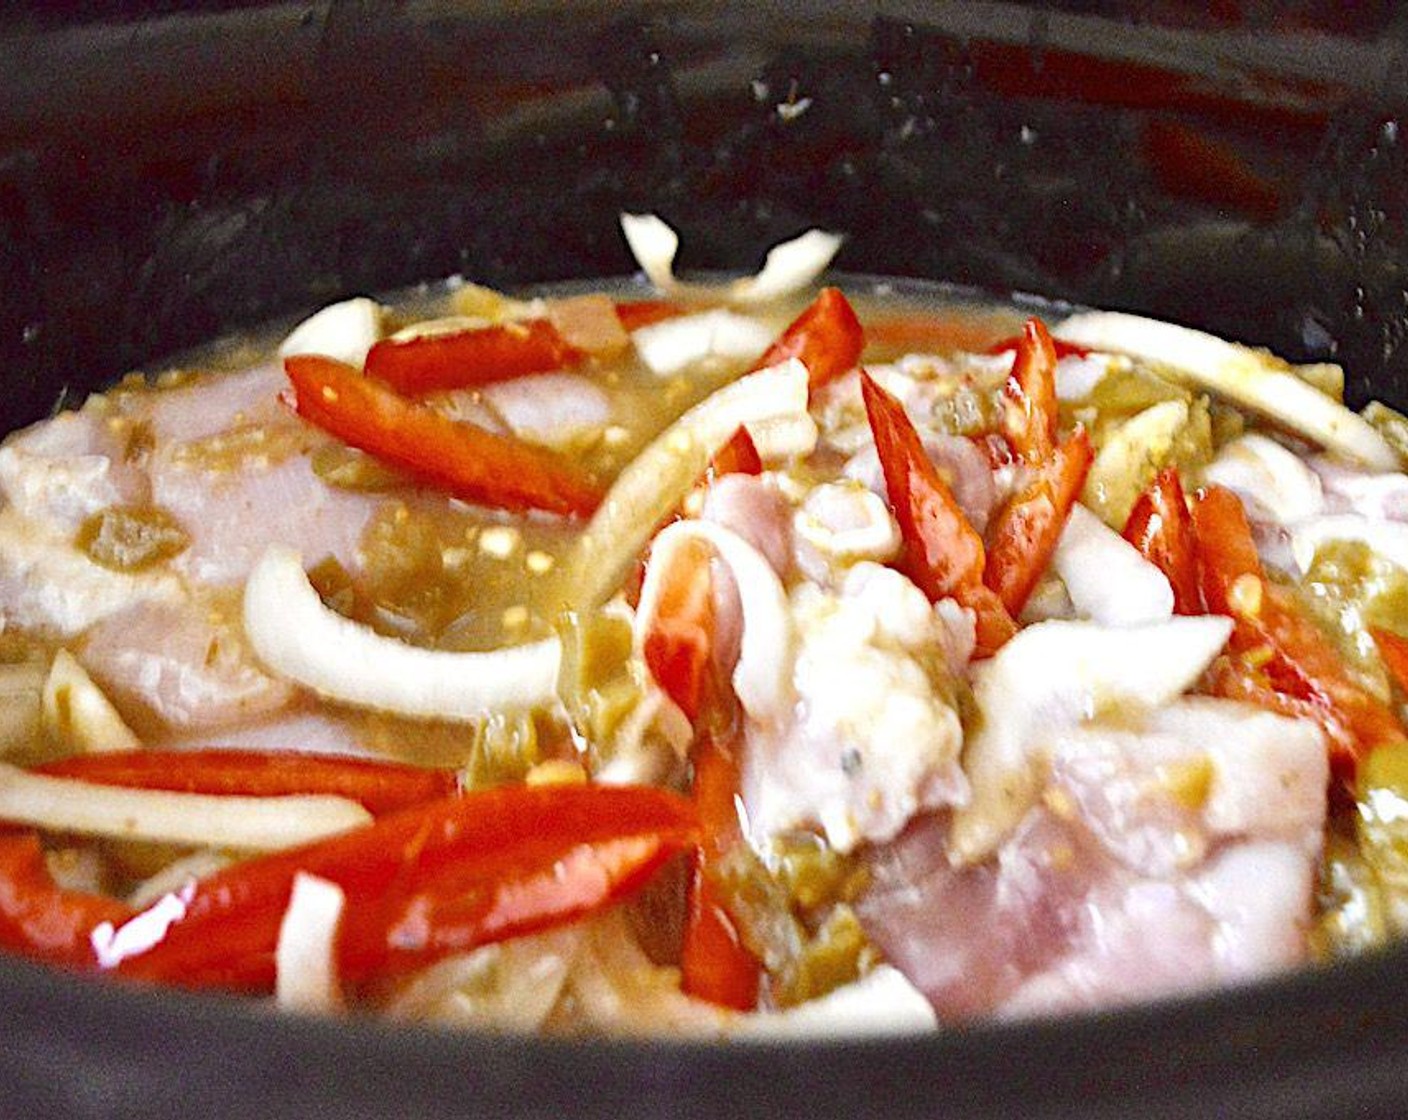 step 1 Set up a slow cooker and combine the Boneless, Skinless Chicken Thighs (1.5 lb), Red Bell Pepper (1), Onion (1), Garlic (2 cloves), Salsa Verde (1 jar), Chicken Stock (1/3 cup), Salt (1 pinch), Ground Black Pepper (1 pinch), and Ground Cumin (1 pinch). Give it a quick stir, then close it up and turn it to low. Let it cook for 5 hours, then open it up and use two forks to give it a stir and shred the chicken up.